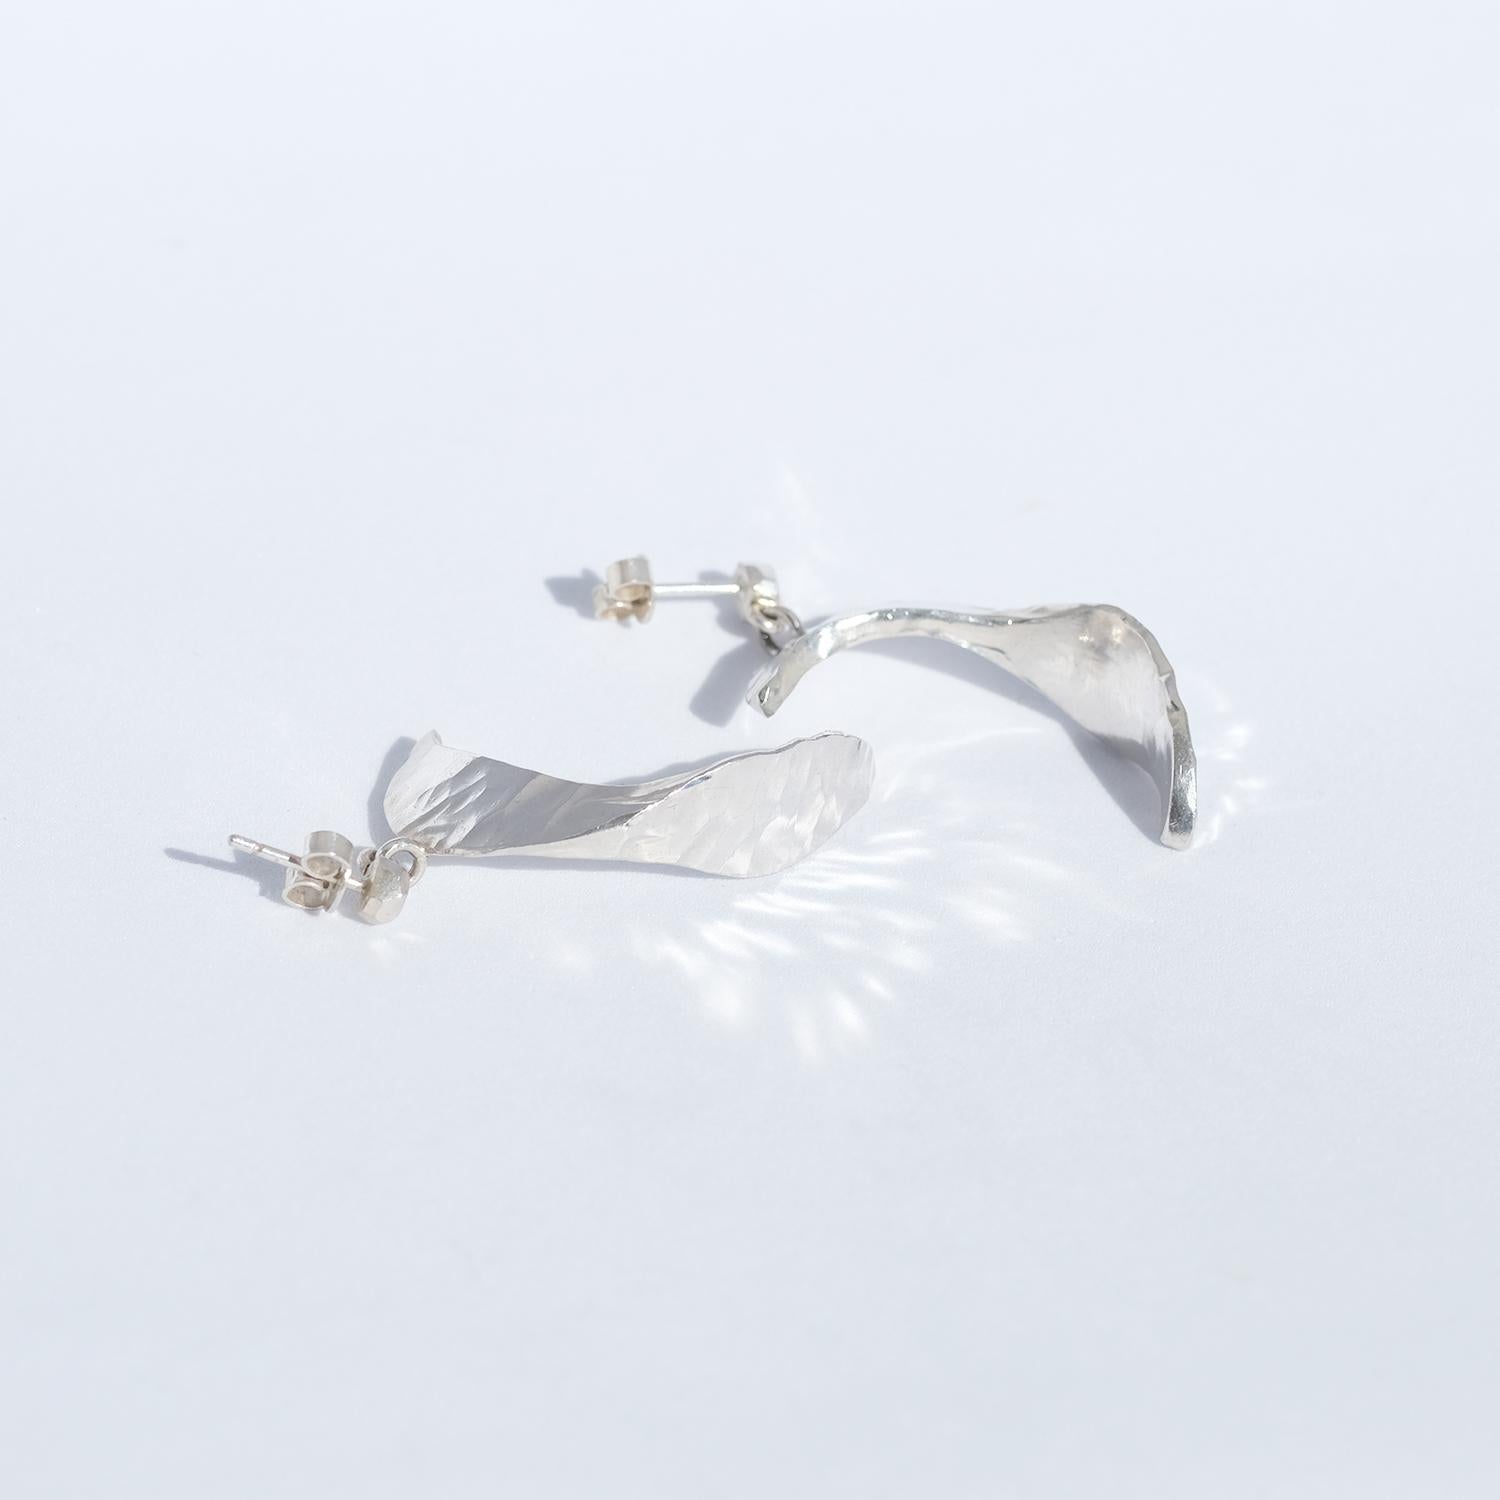 Women's Pair of Sterling Silver Earrings Made by the Swedish Smith Rey Urban in 1991